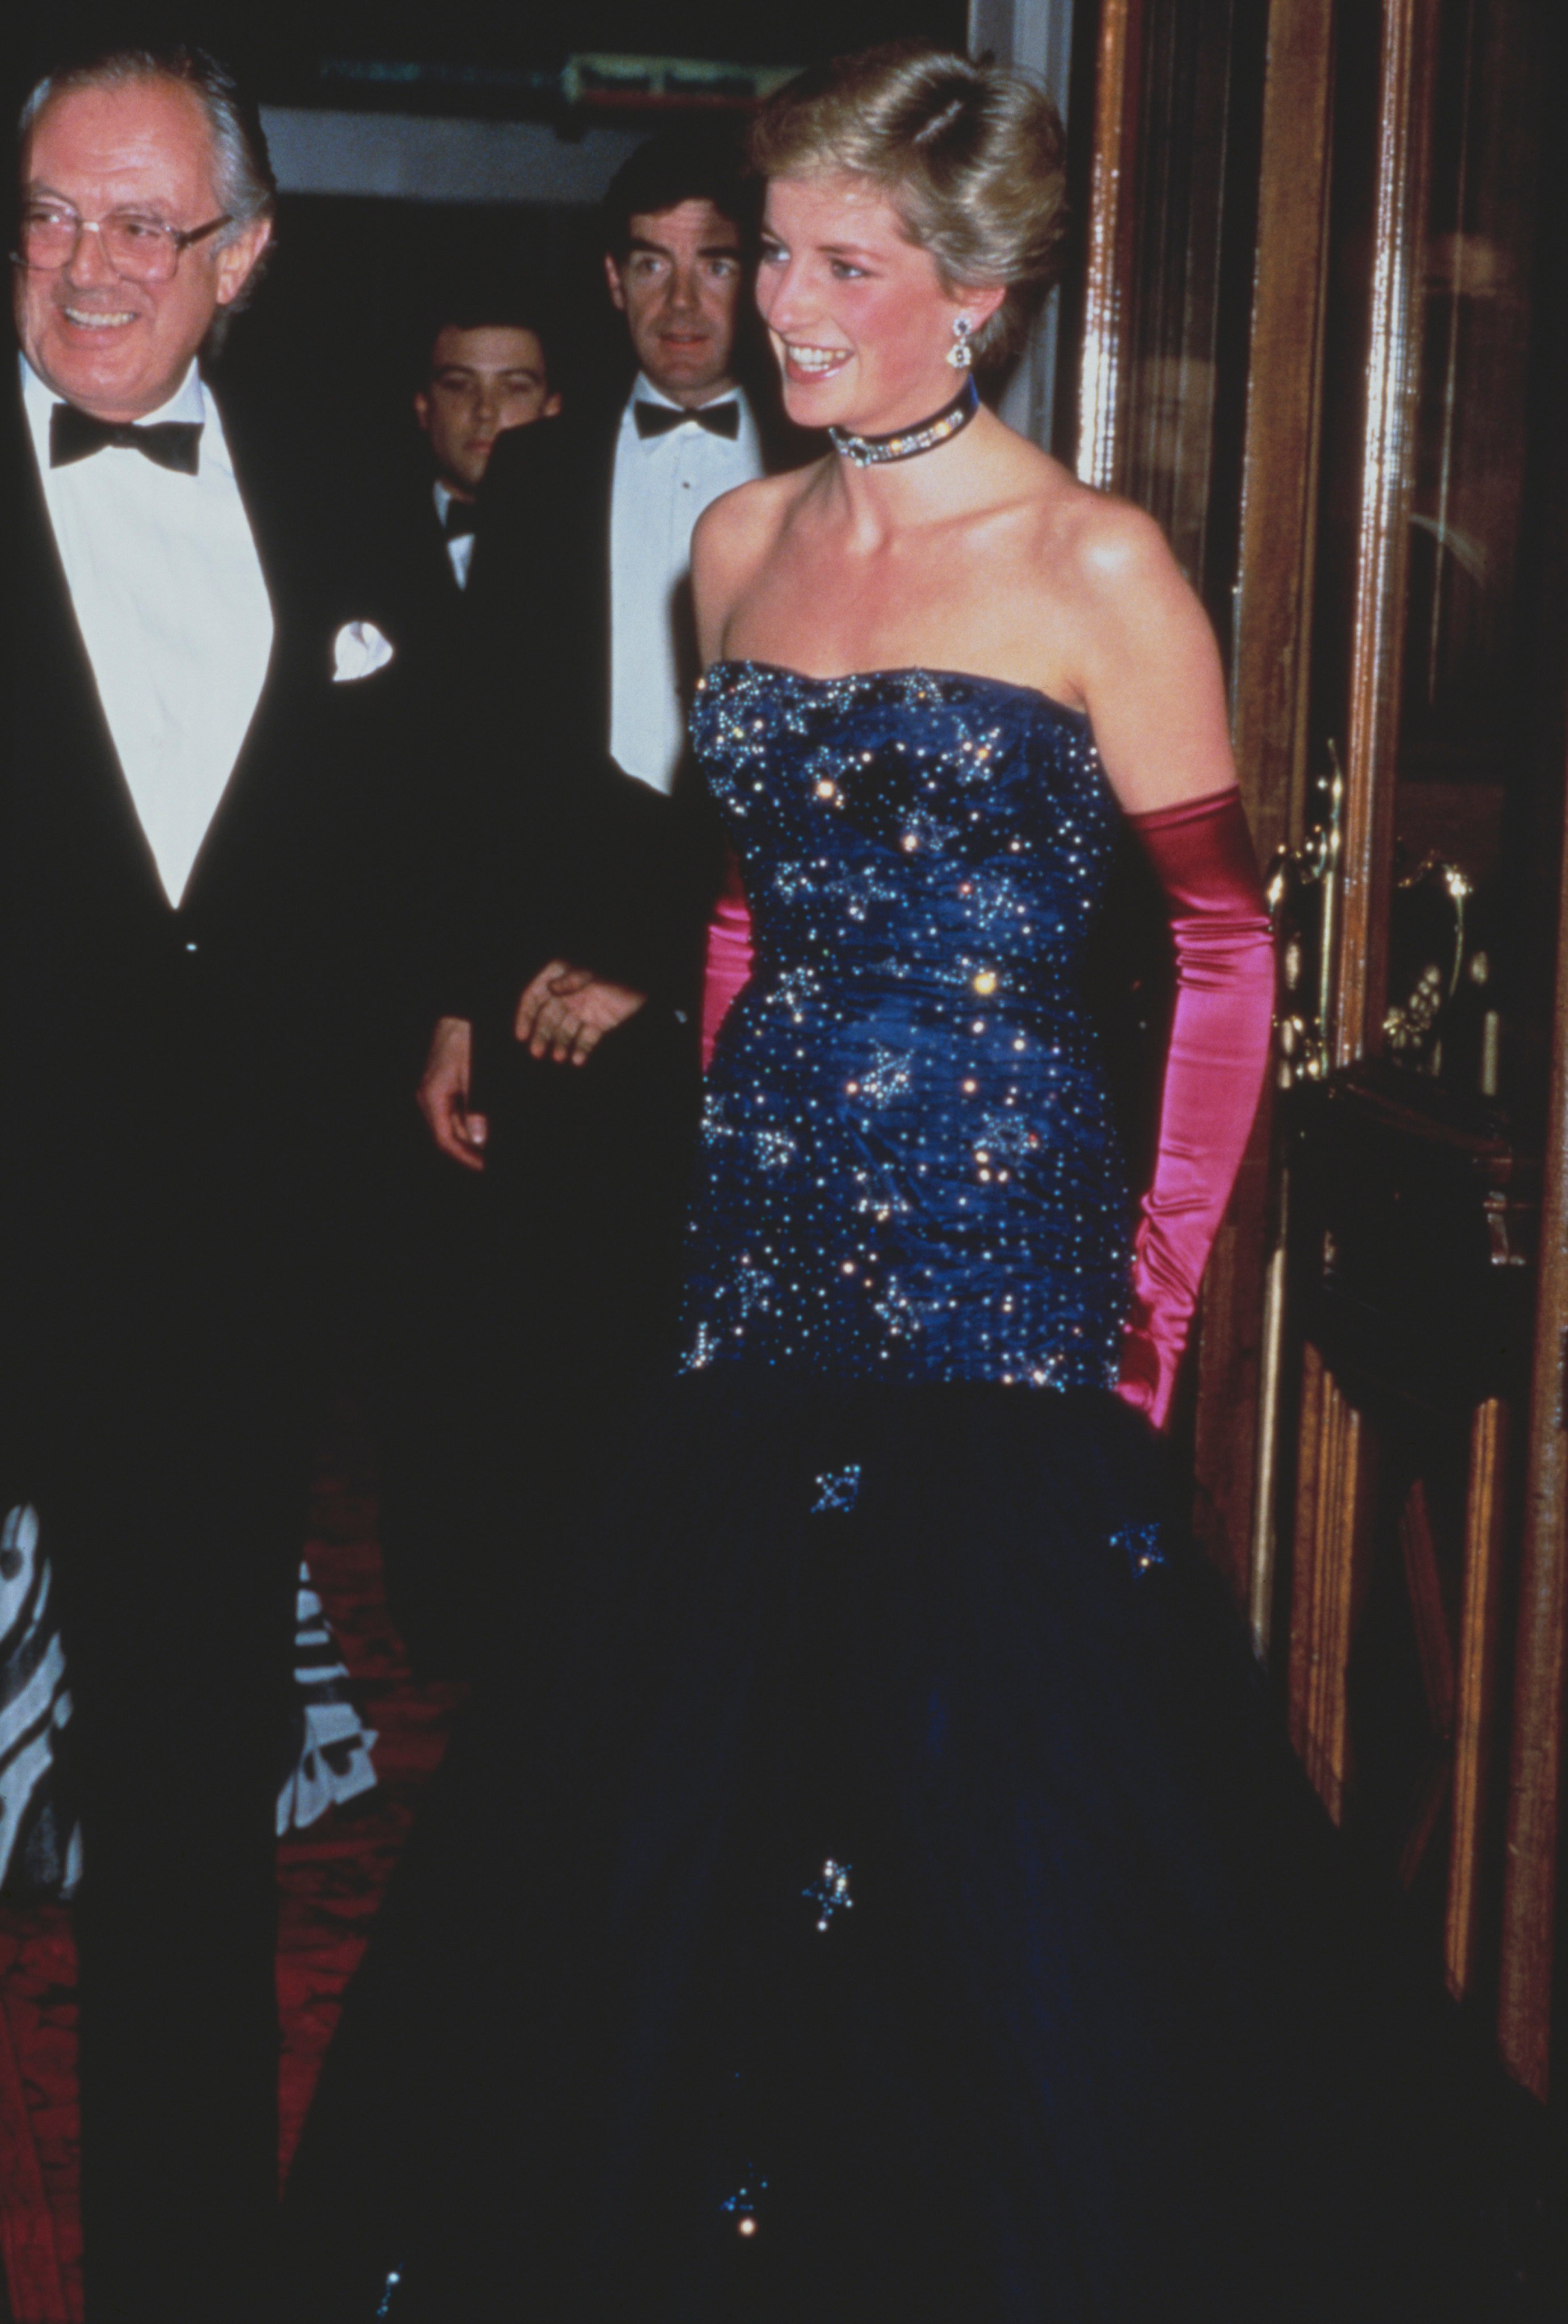 Princess Diana wears a navy blue Murray Arbeid dress in London, in 1986. This outfit along with others will feature in “Princess Diana’s Elegance & A Royal Collection” exhibition at Hong Kong’s K11 Musea. Photo: Getty Images